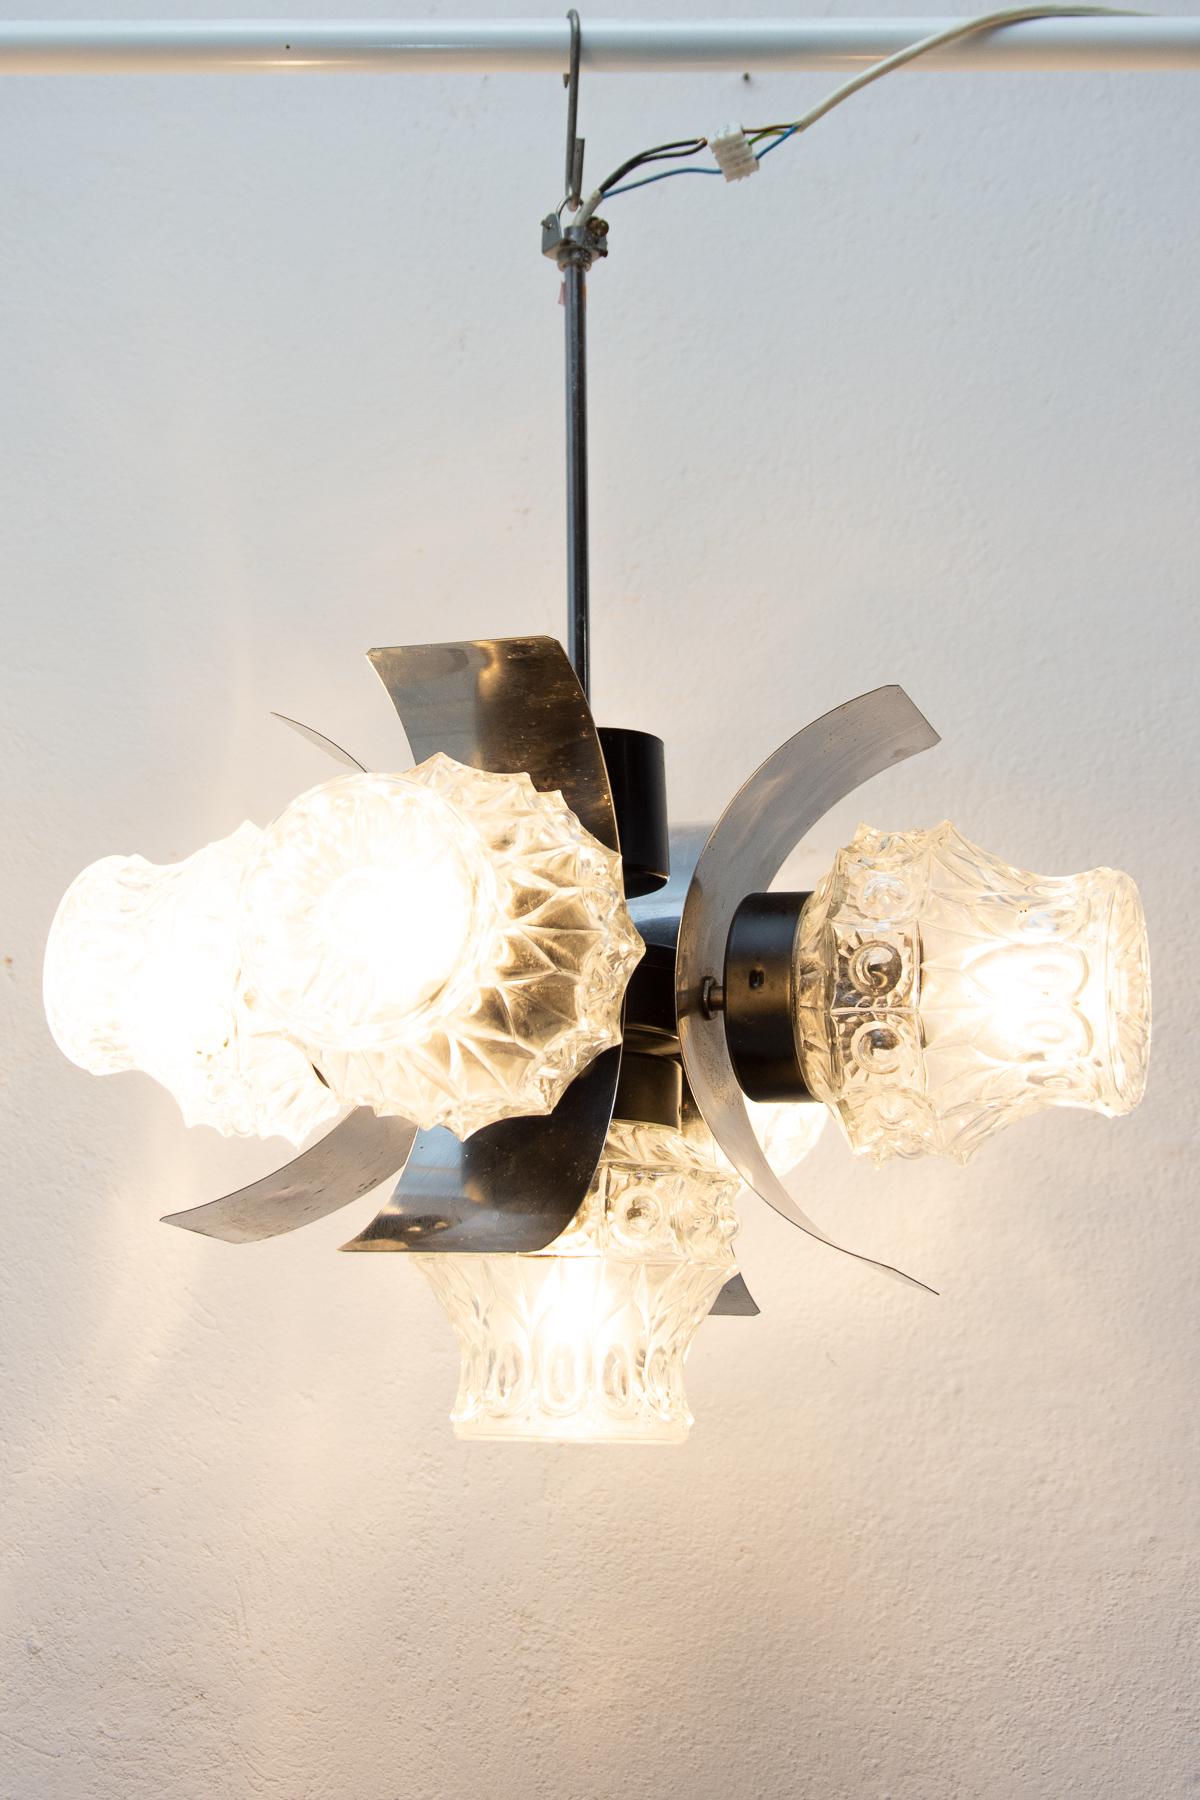 This chandelier was made in the 1970´s in the former Czechoslovakia.

It is made of black sheet metal, glass, chrome and metal.

New wiring, cleaned, in good Vintage condition.

Works on five E27 bulb.